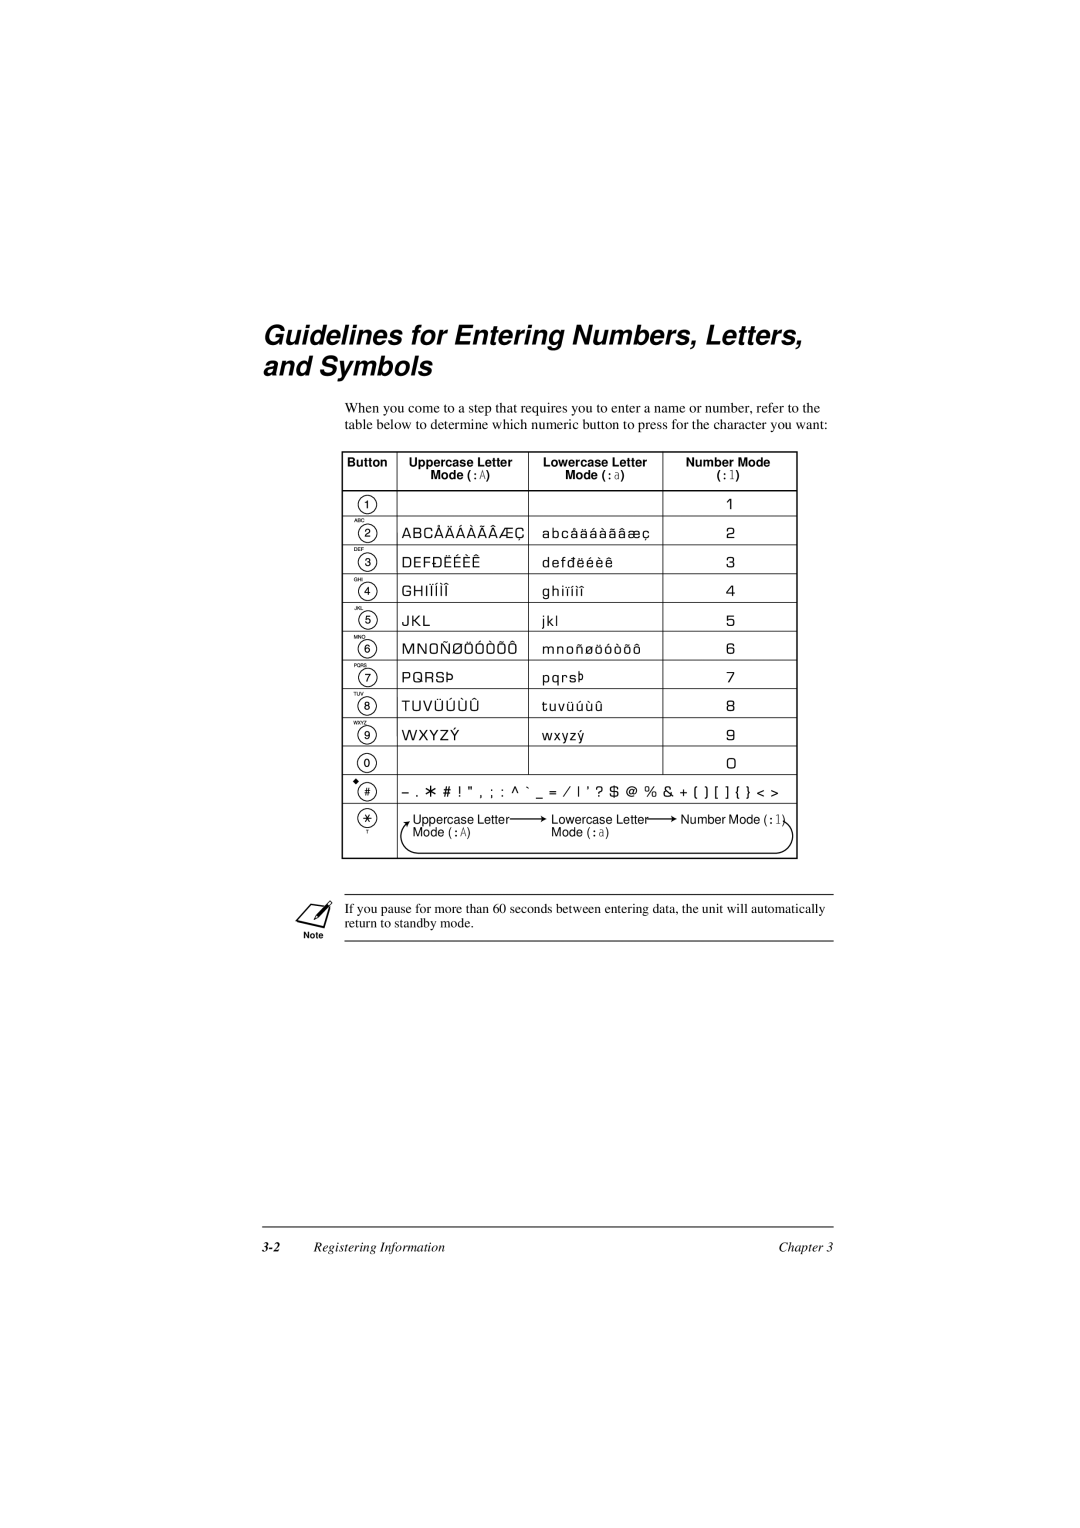 Canon L290, L240 Guidelines for Entering Numbers, Letters, and Symbols, Registering Information, Button, Lowercase Letter 